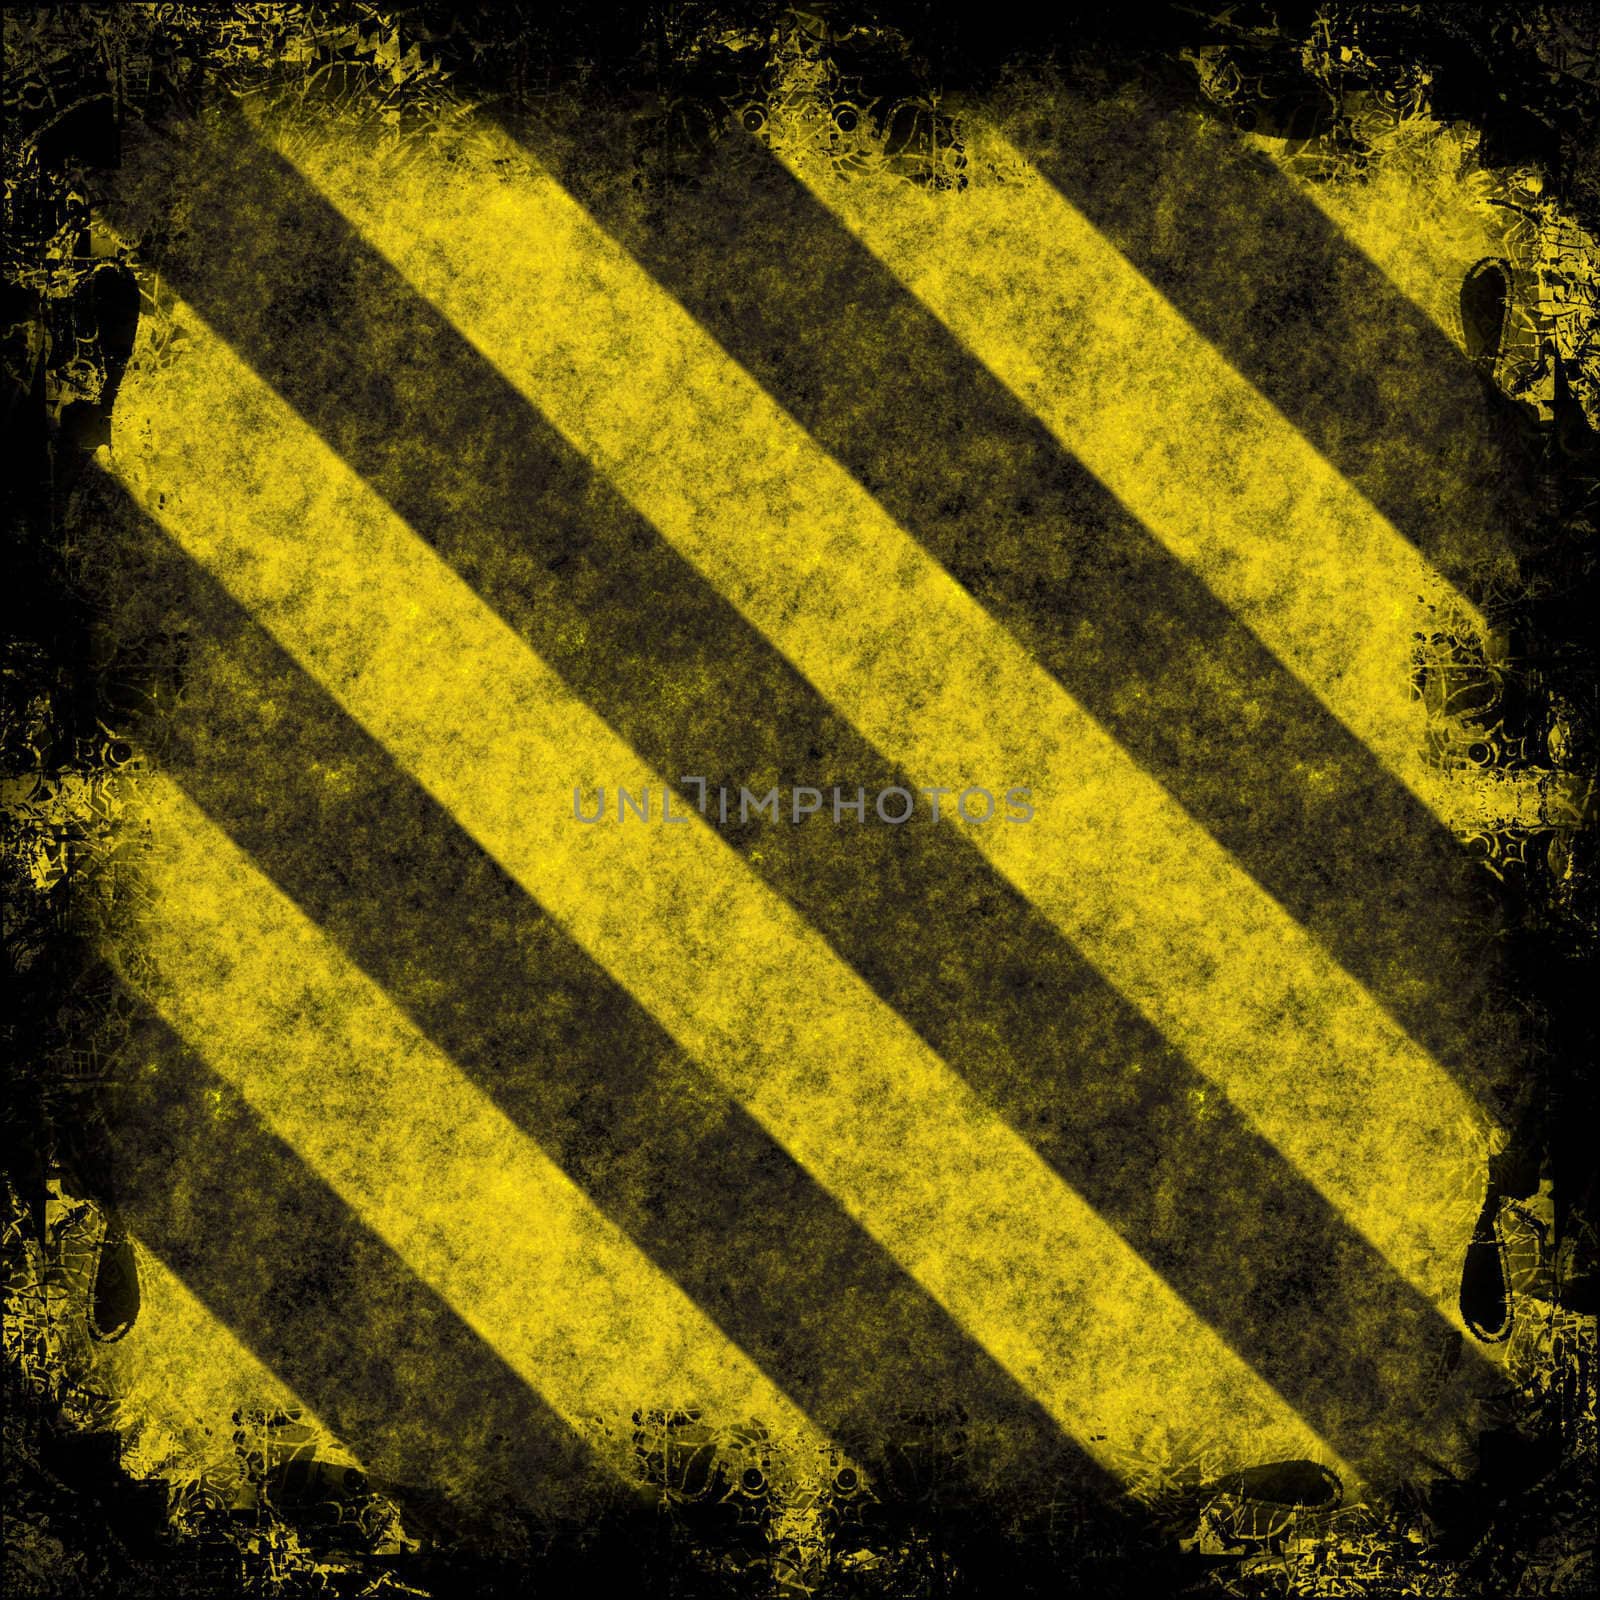 A diagonal hazard stripes frame.  The stripes are weathered, worn and grunge-looking.  